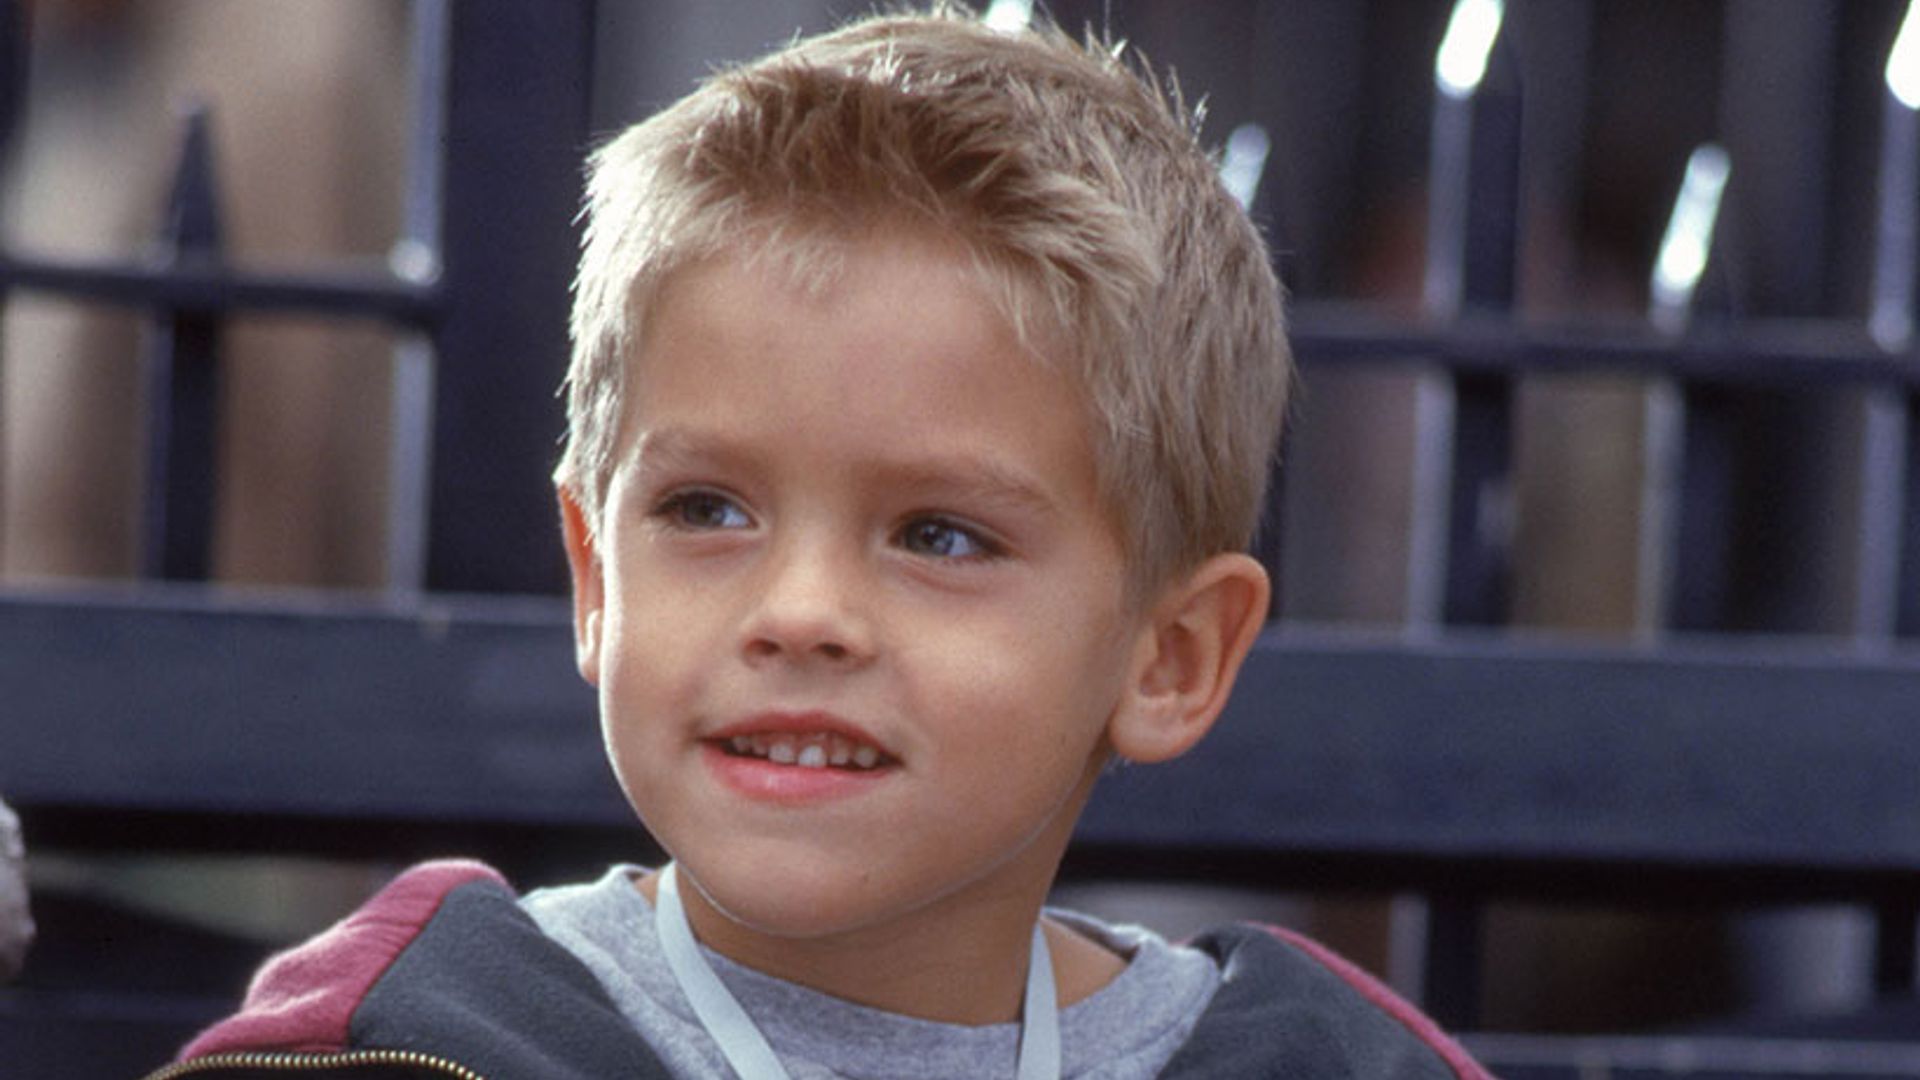 Friends child star Cole Sprouse looks all grown up as he reveals crush on Jennifer Aniston